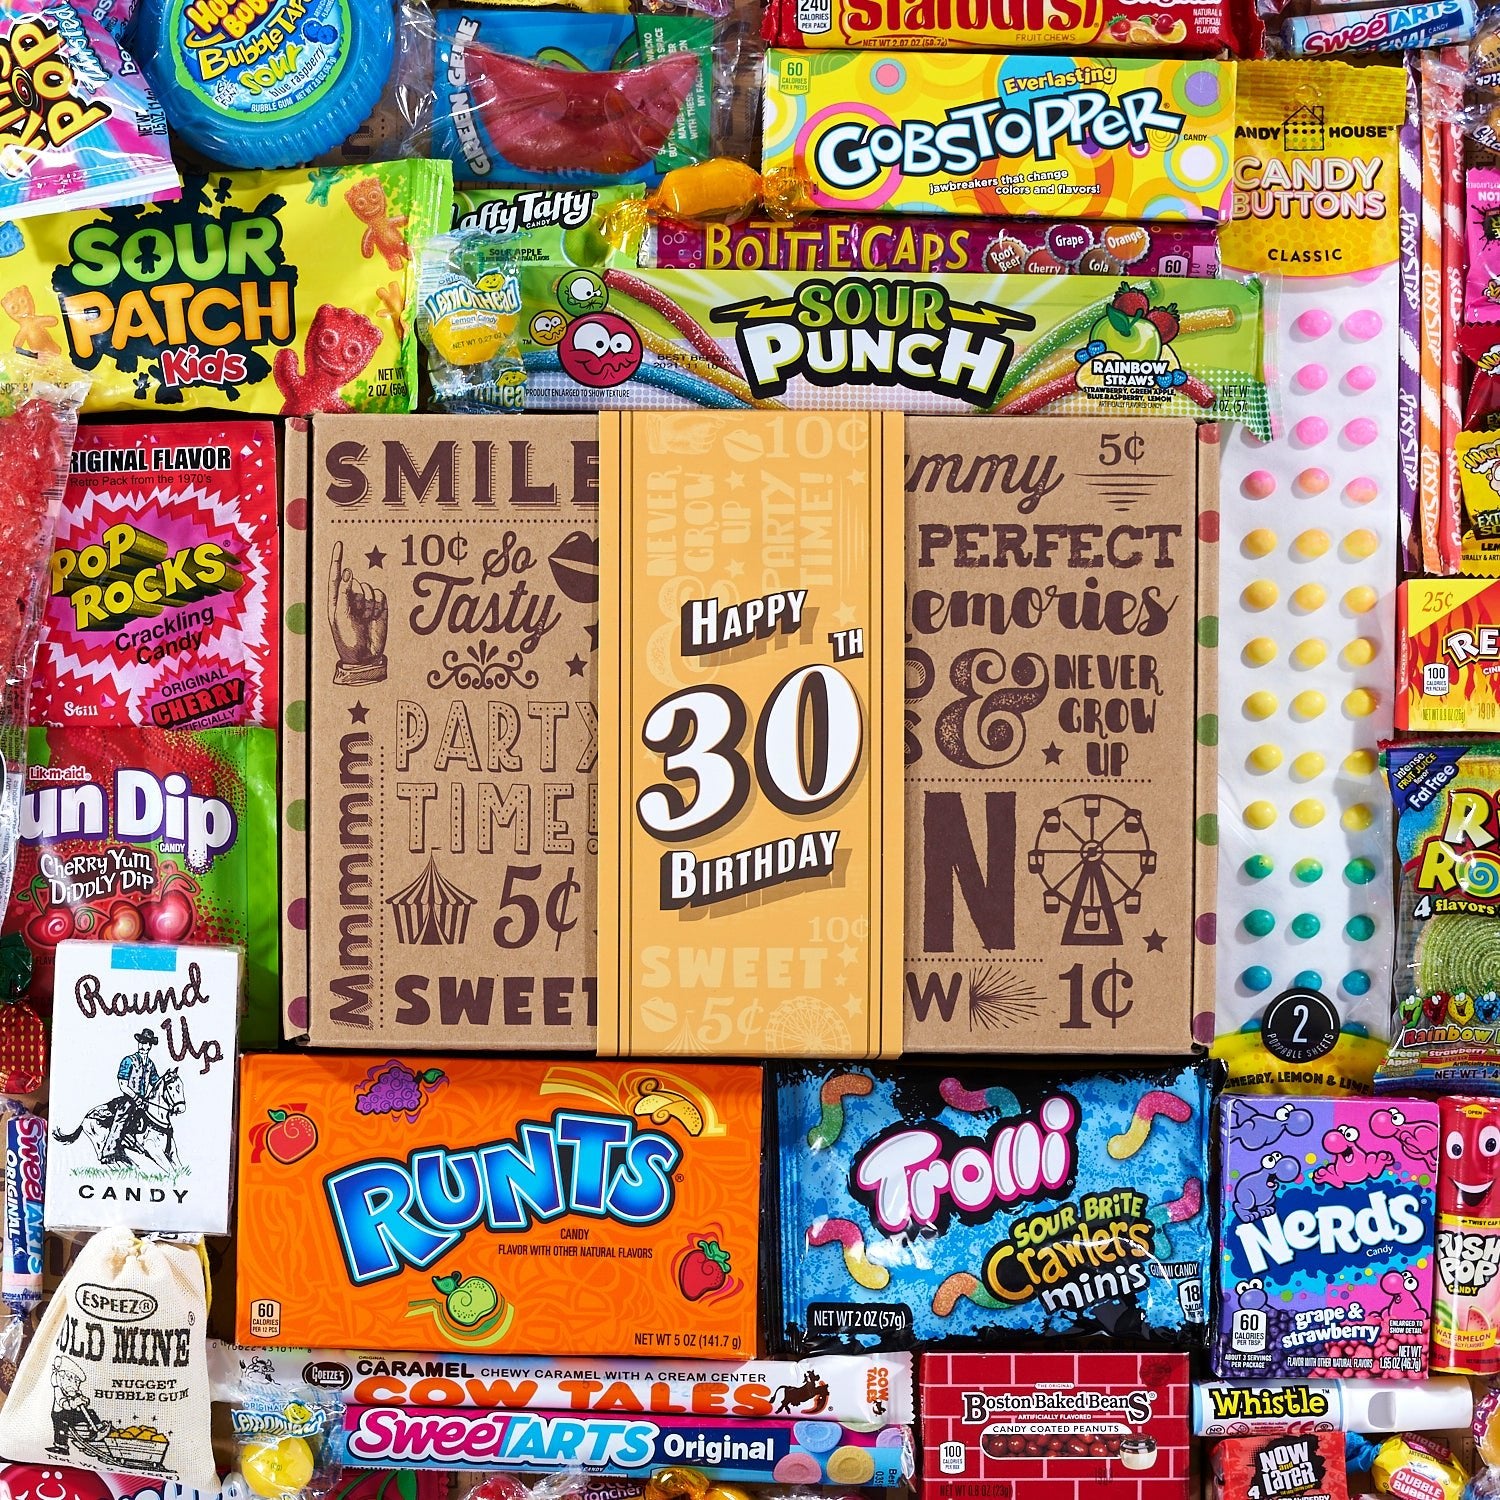 30th Birthday Retro Candy Gift - Vintage Candy Co.